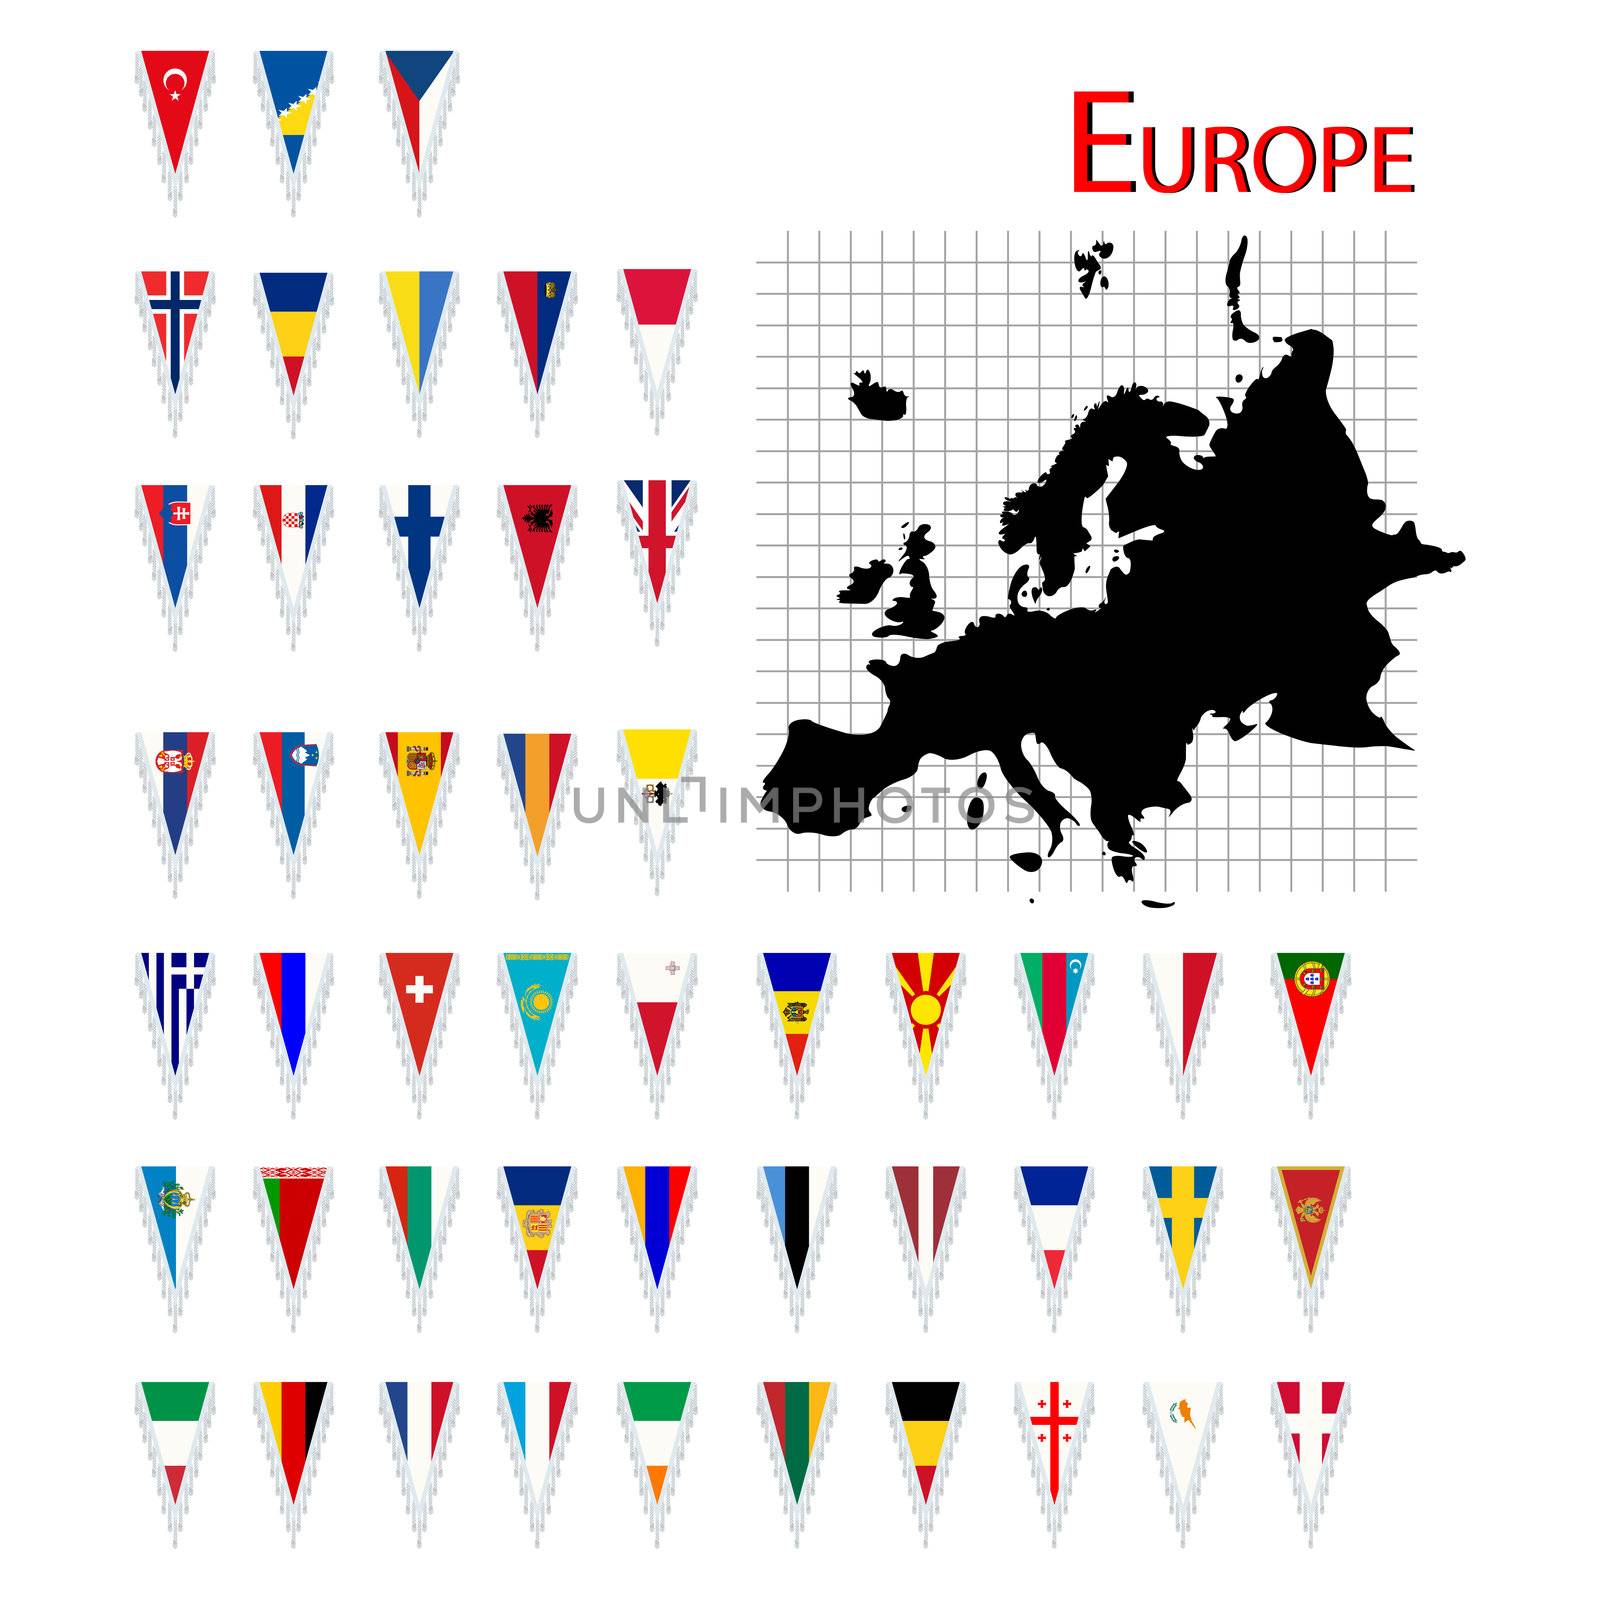 Flags of Europe by catacos